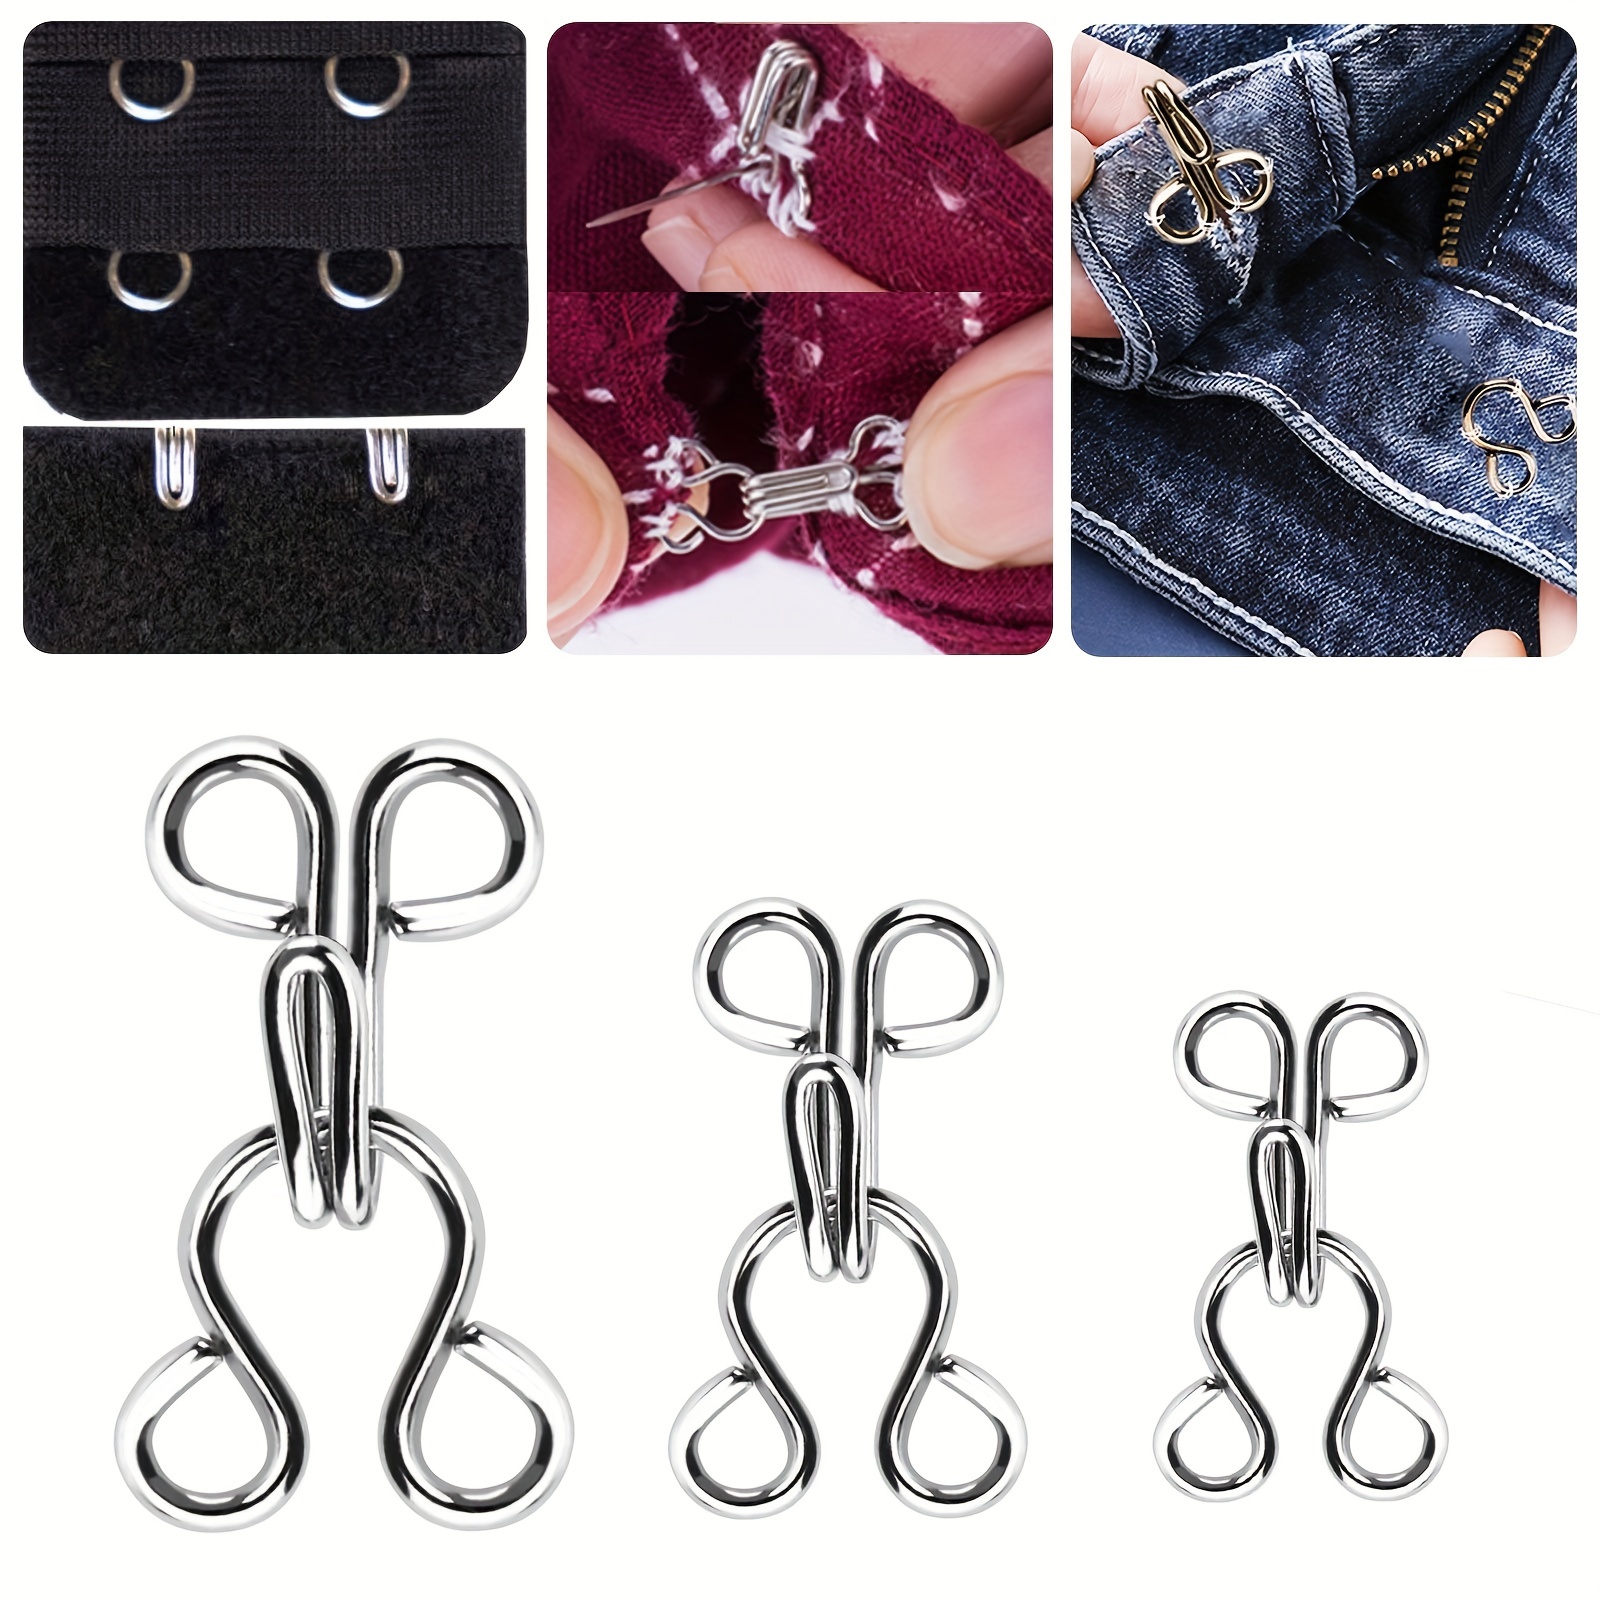 24pcs Sewing Hook And Eye Latch For Clothing Bra Hooks Replacement Large  Hooks And Eyes Clasps For Clothing Sewing Diy Craft 3 Sizes 23 17 12 5mm